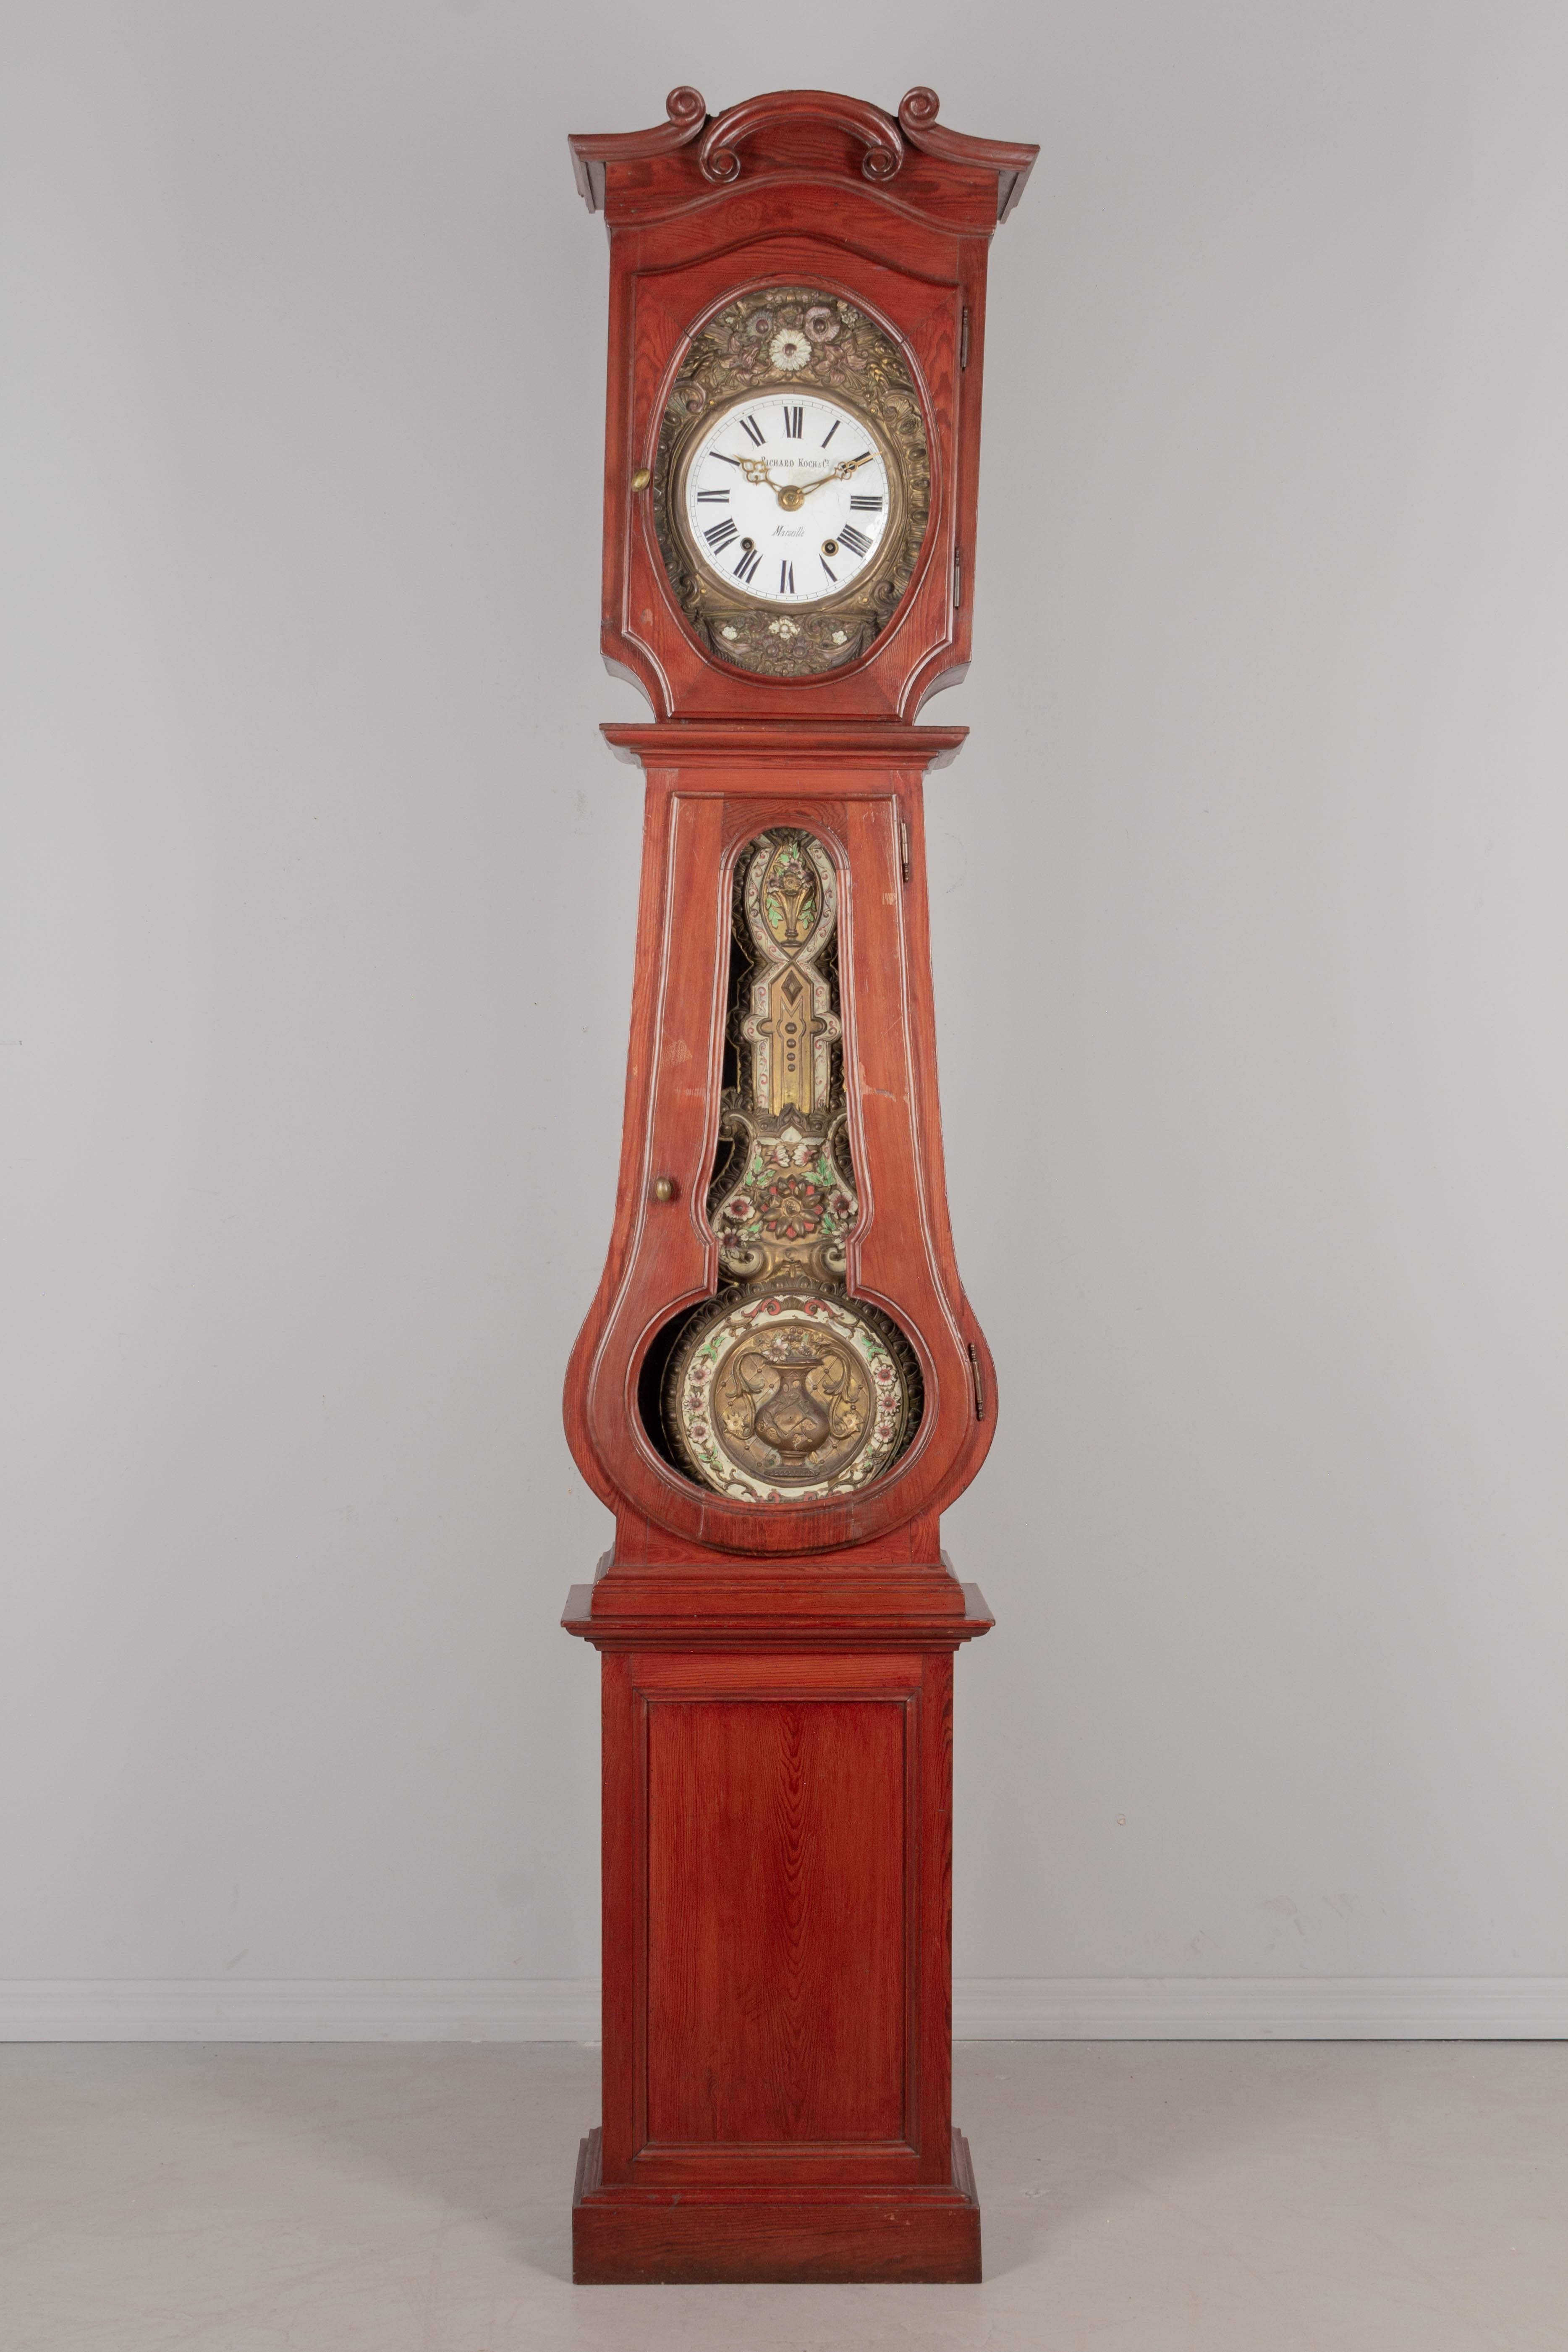 A 19th century Country French comtoise, or grandfather clock, with pine case and embossed brass pendulum. The case is from Normandy circa 1900-1920 and the movement is from Marseilles circa 1880-1900. The seven day Morbier movement and has been